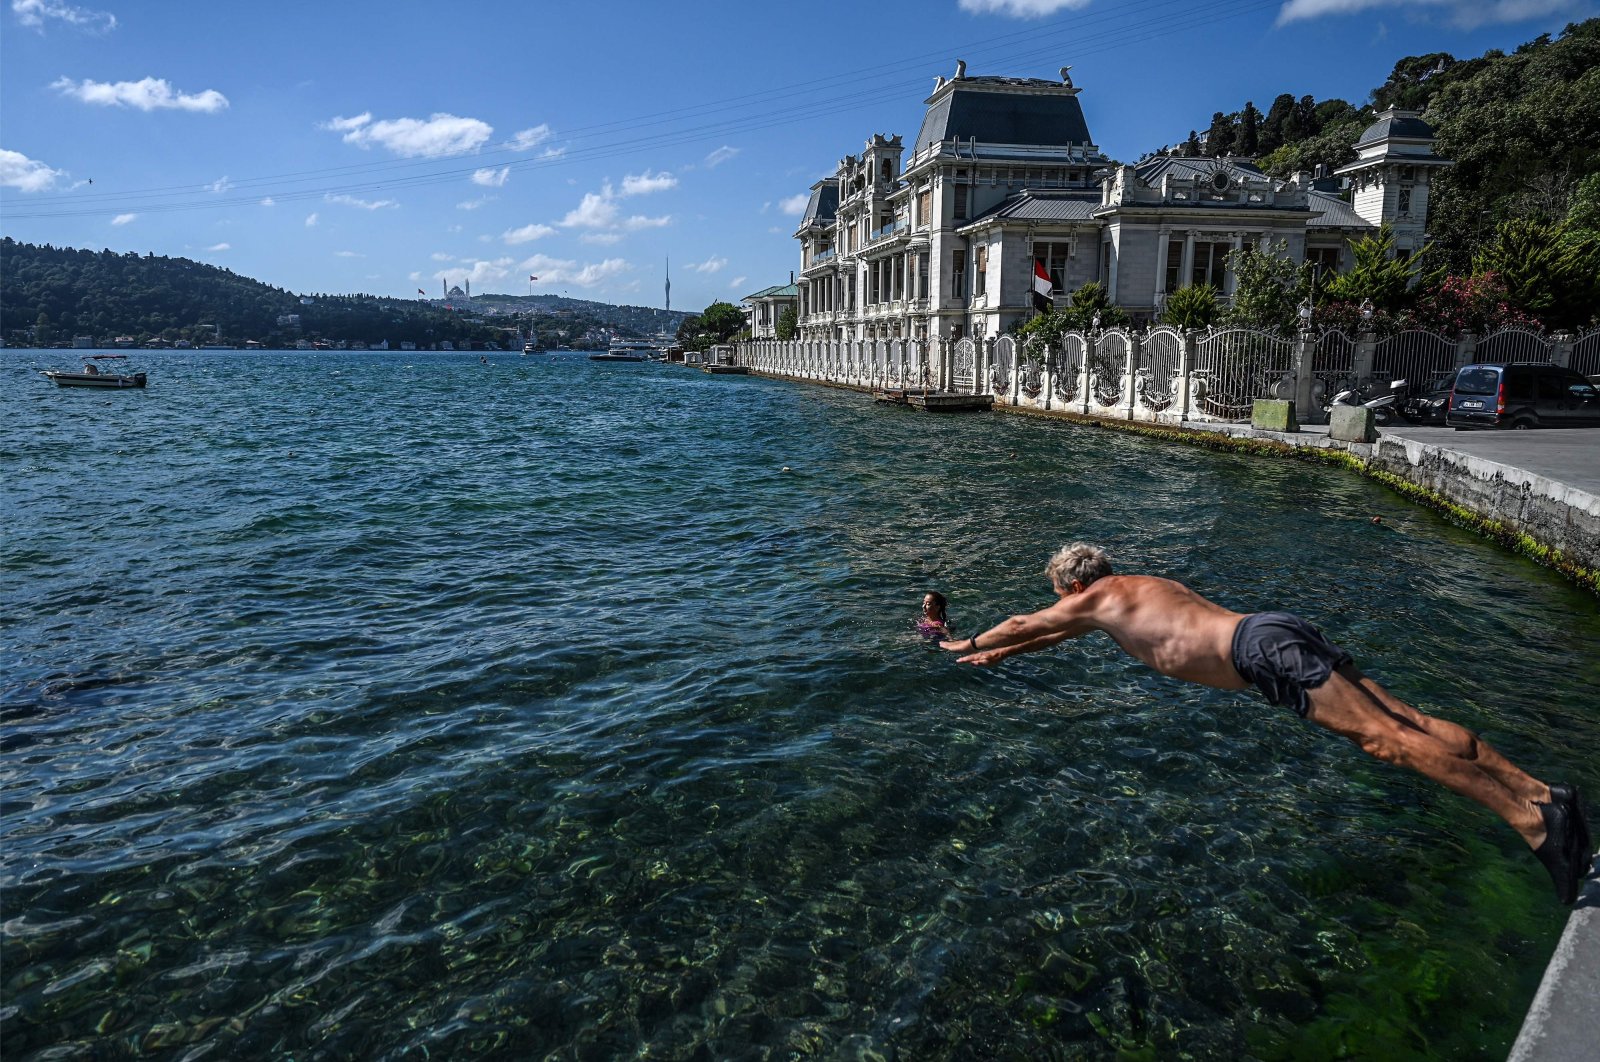 A swimmer dives into the water in the Bebek neighborhood, in Istanbul, Turkey, July 29, 2022. (AFP PHOTO)